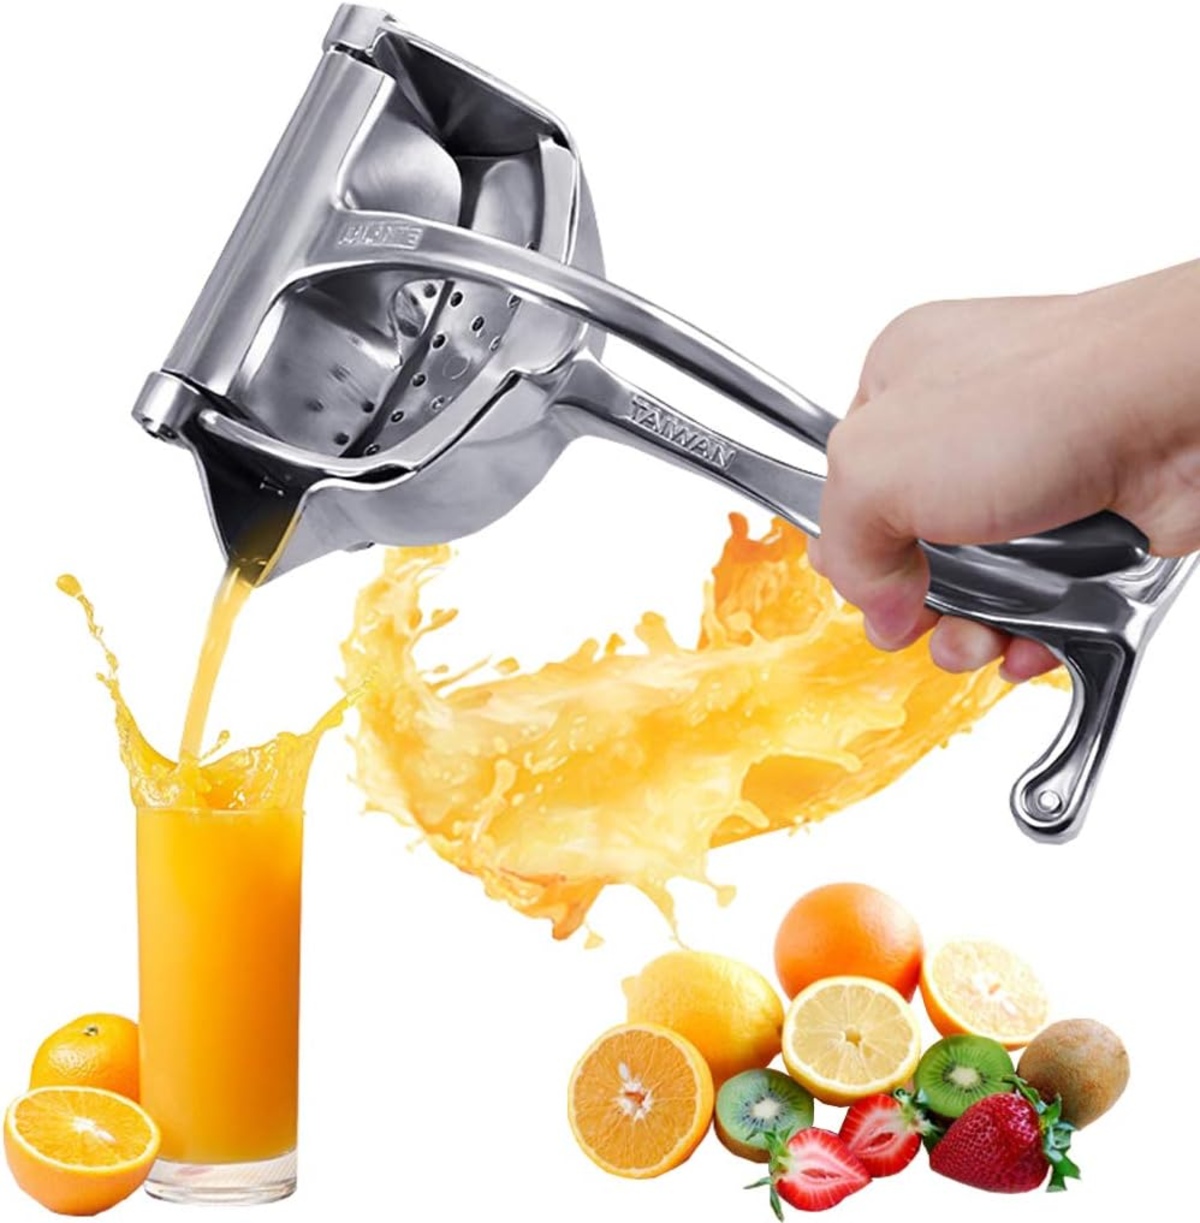 Best manual juicers: Squeeze all the vitamins from your produce